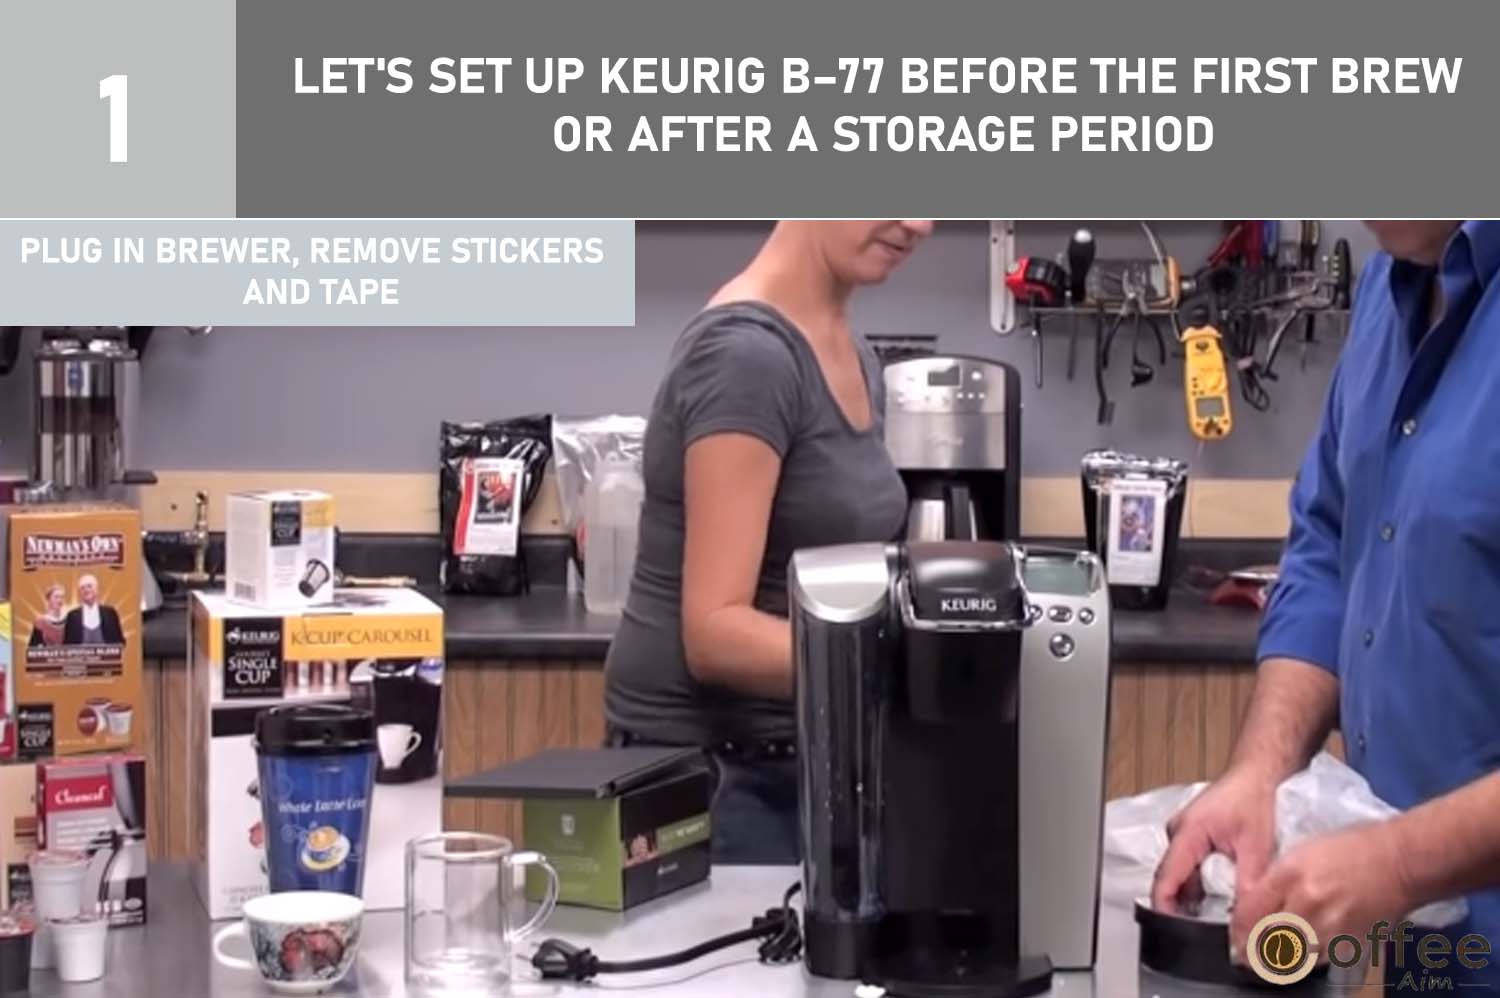 Unplug the cord and connect the Keurig B-77 to a grounded outlet. Remove plastic stickers from the LCD and all packing tape pieces for setup completion.